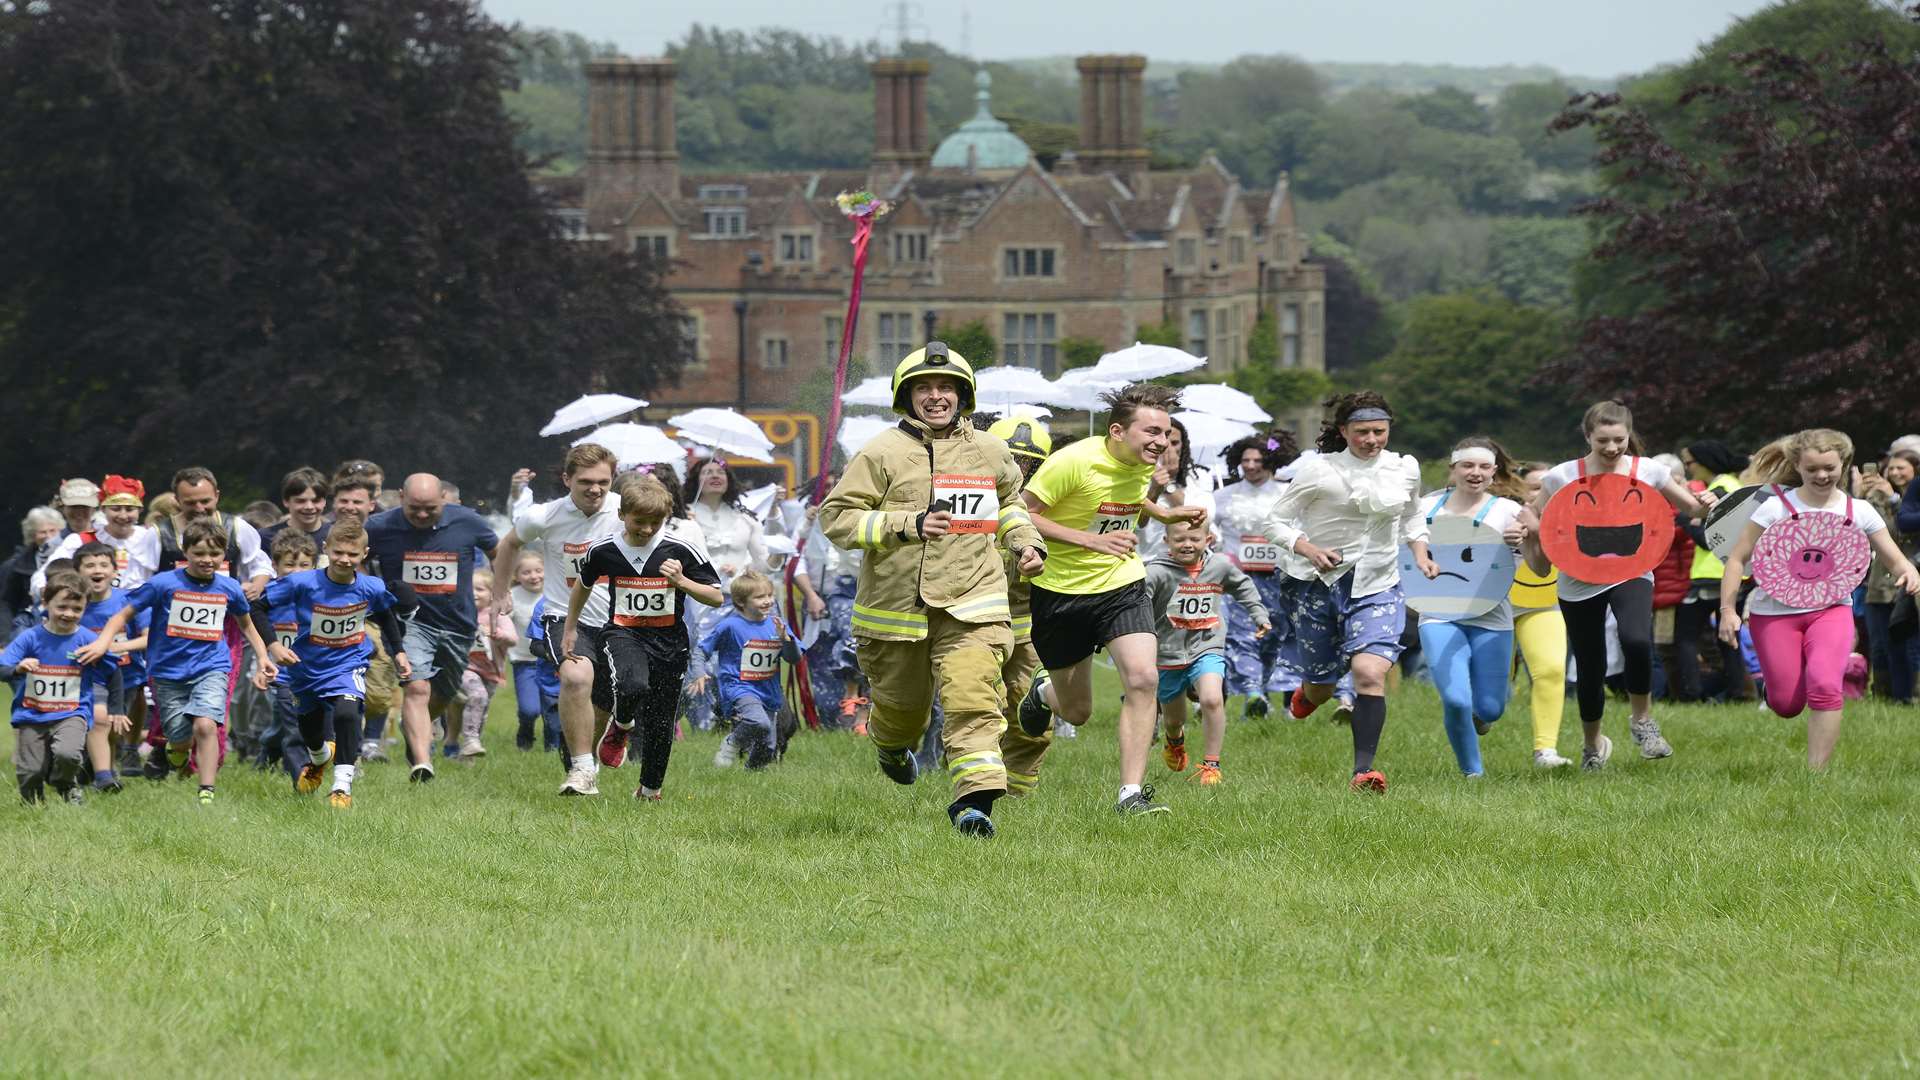 And they're off! The Chilham Chase will follow the Shakespeare performances Picture: Paul Amos